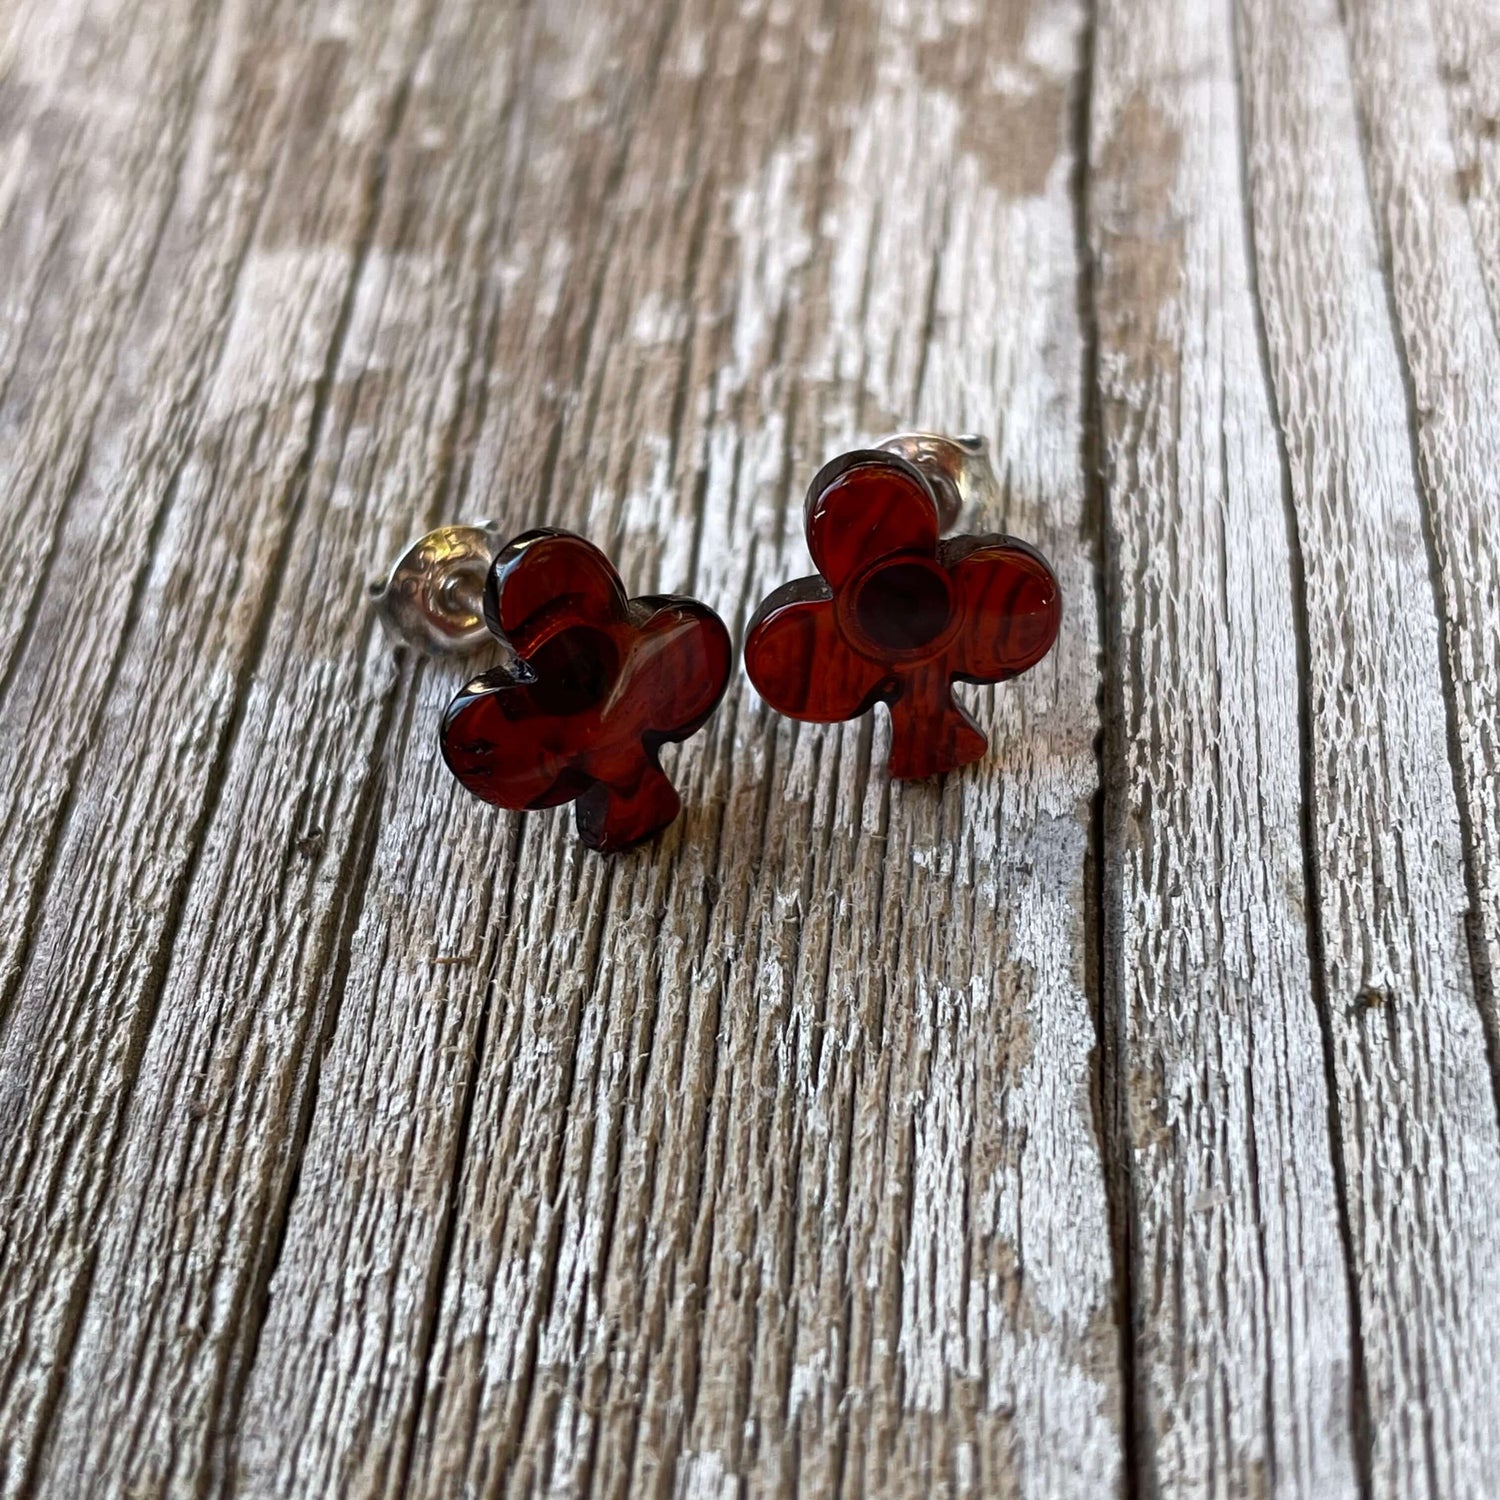 amber and silver clover stud earrings